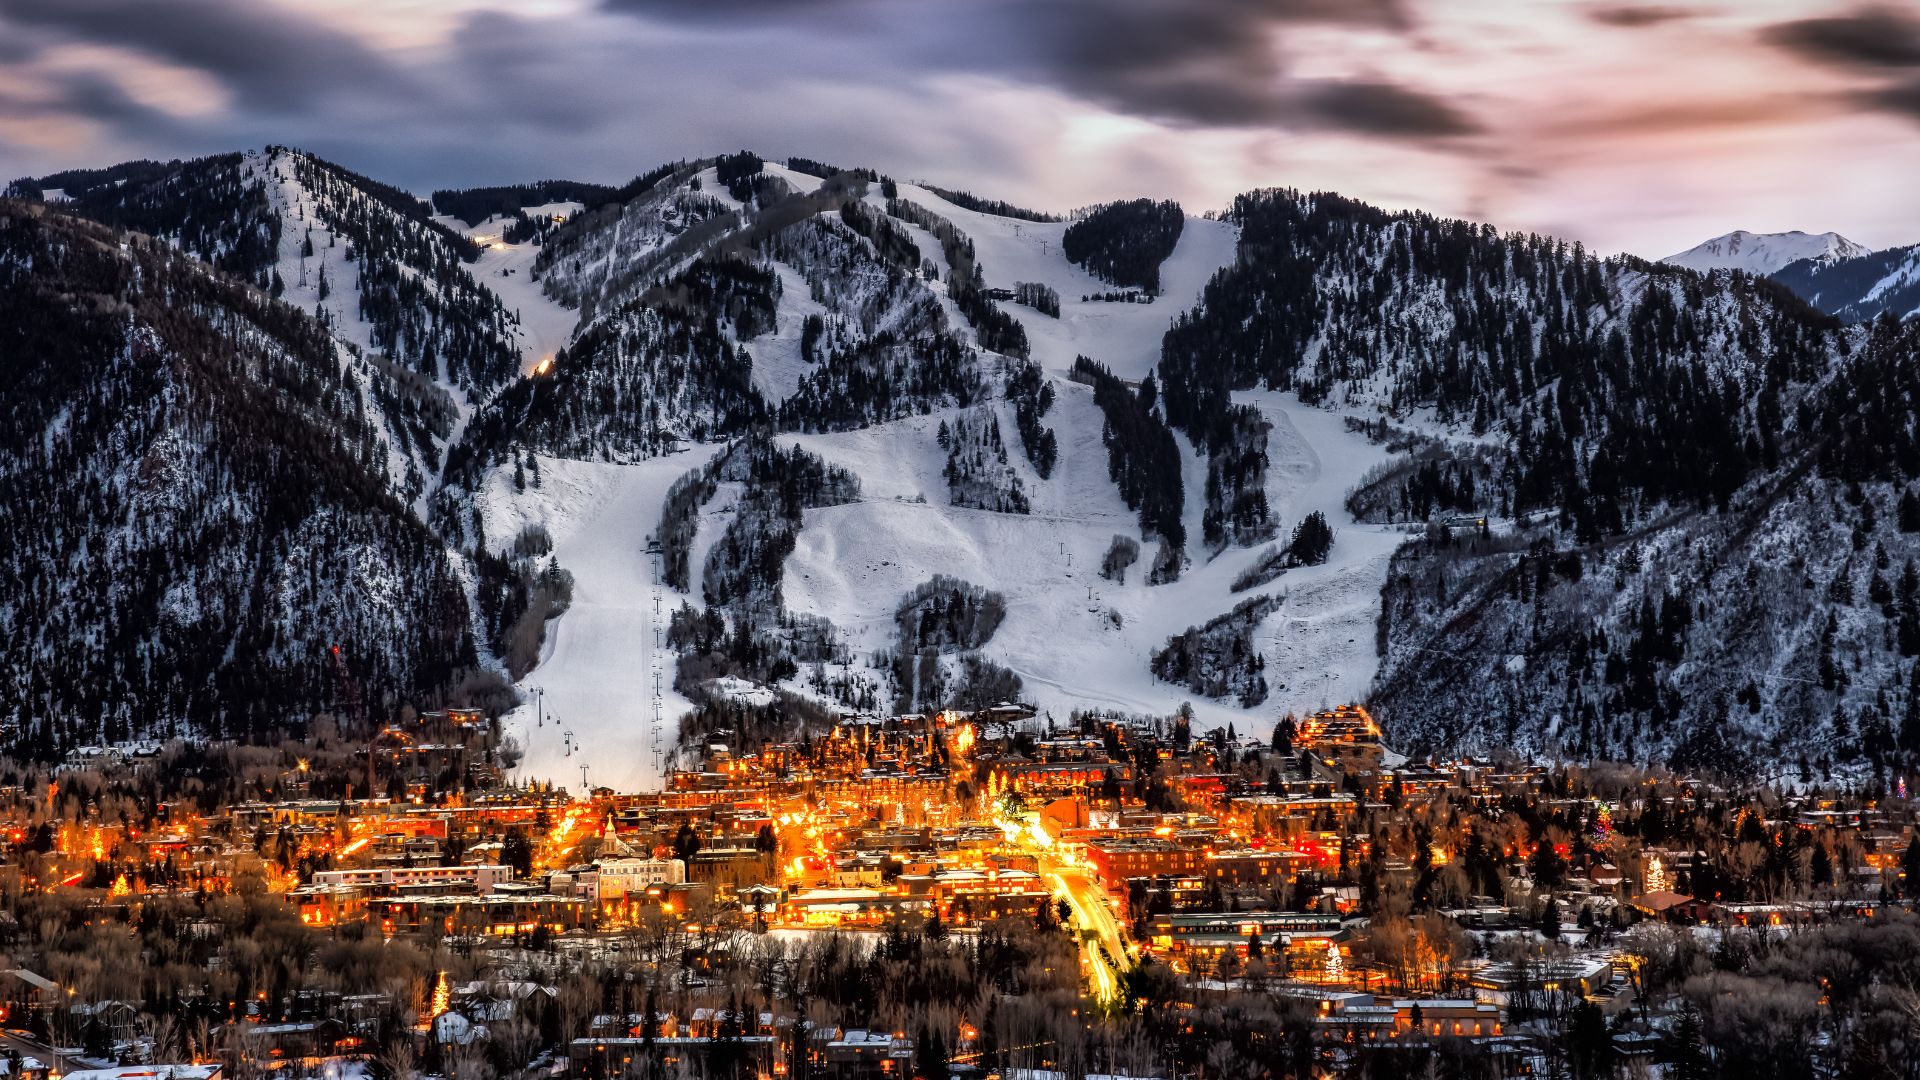 The city of Aspen Colorado glows at the base of a snowy mountain during dusk in peak winter ski season